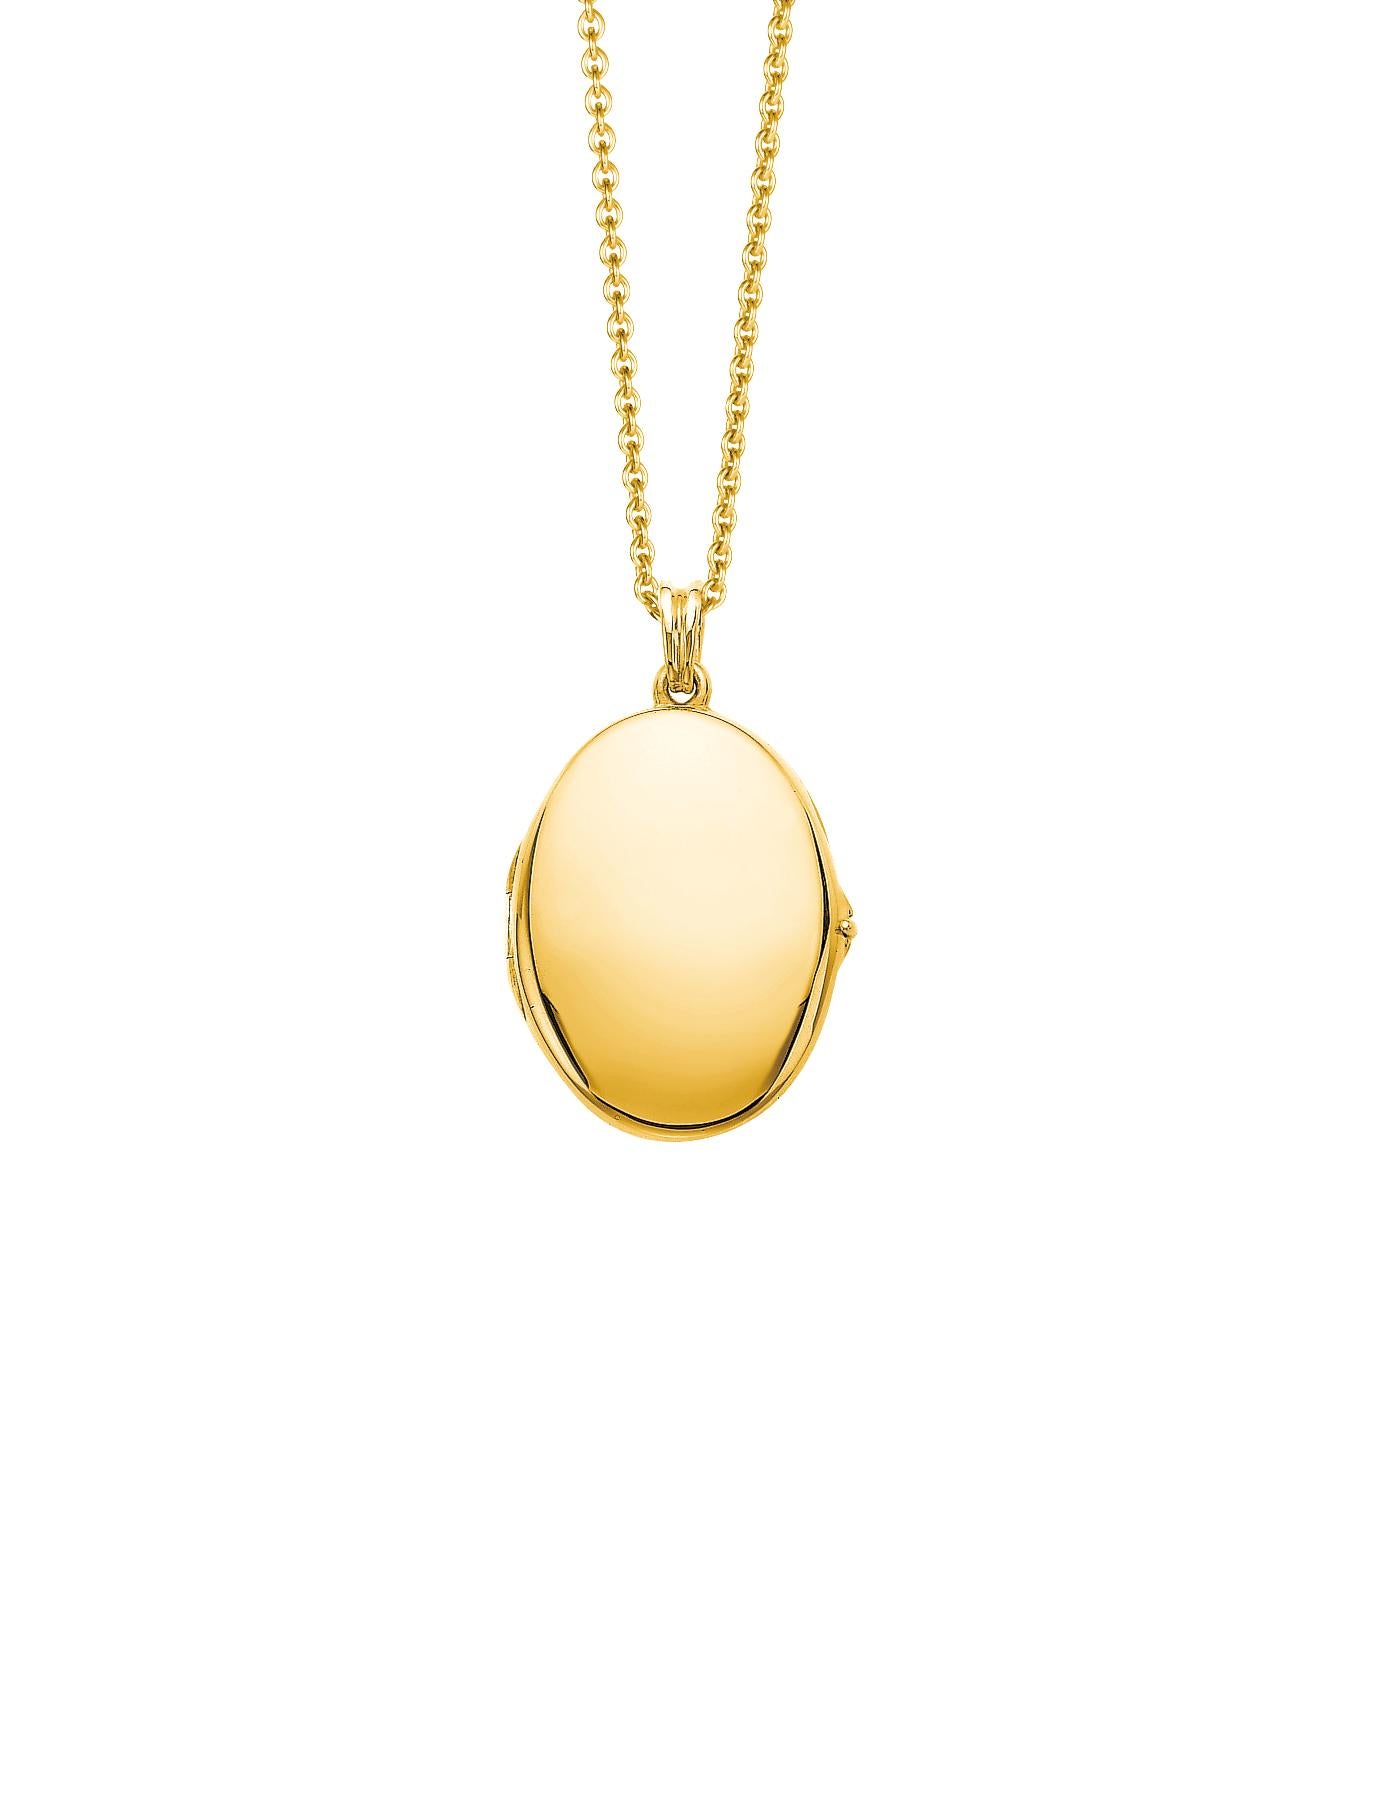 Victor Mayer customizable oval locket pendant necklace 18k yellow gold, Hallmark Collection, measurements app. 23.0 mm x 32.0 mm

About the creator Victor Mayer
Victor Mayer is internationally renowned for elegant timeless designs and unrivalled